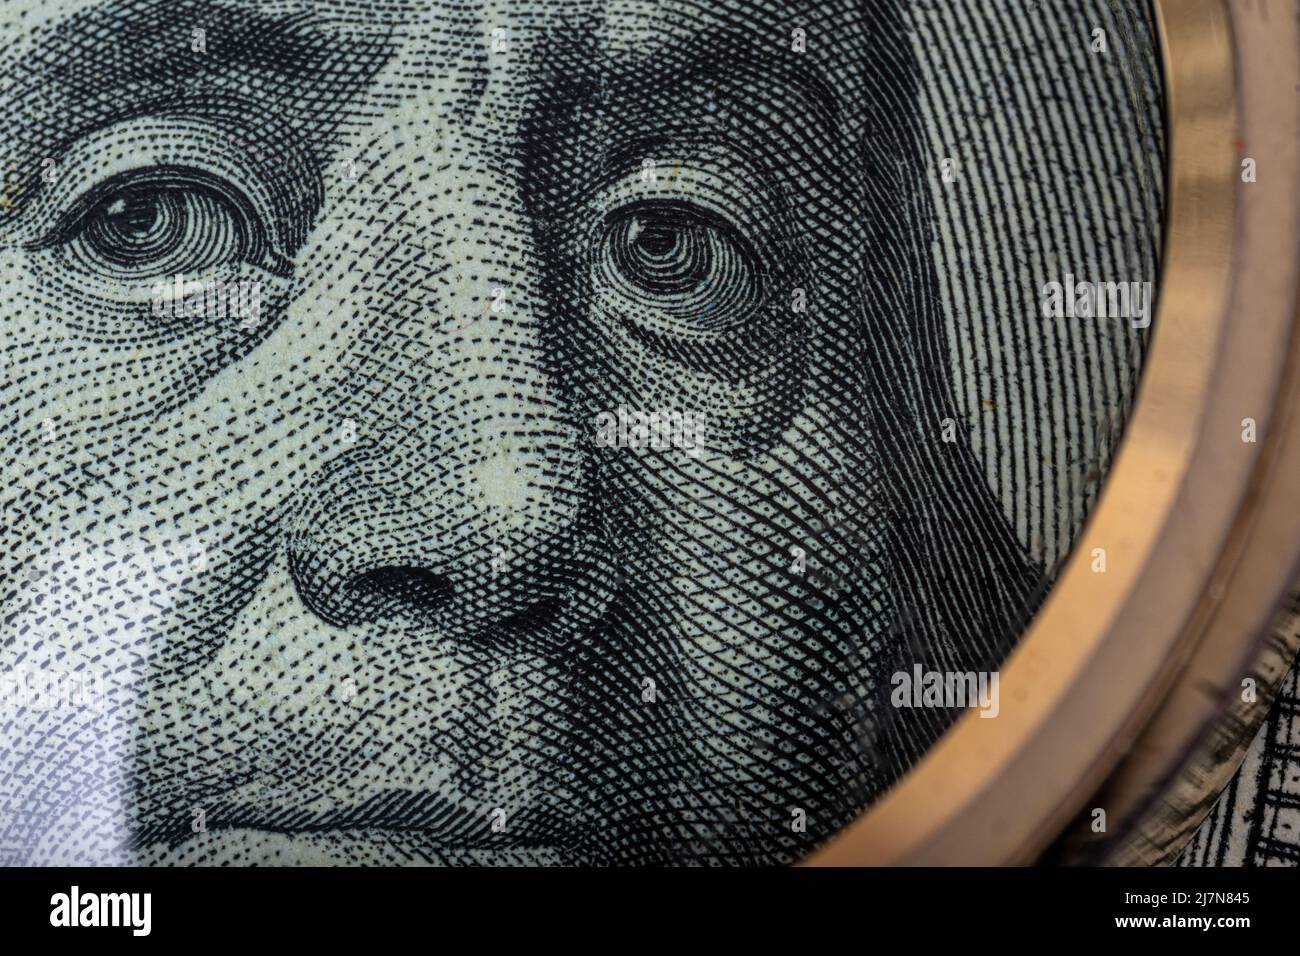 Close-up portrait of Ben Franklin on the US 100 dollar bill under a magnifying glass. Benjamin Franklin on one hundred dollar American banknote, close Stock Photo